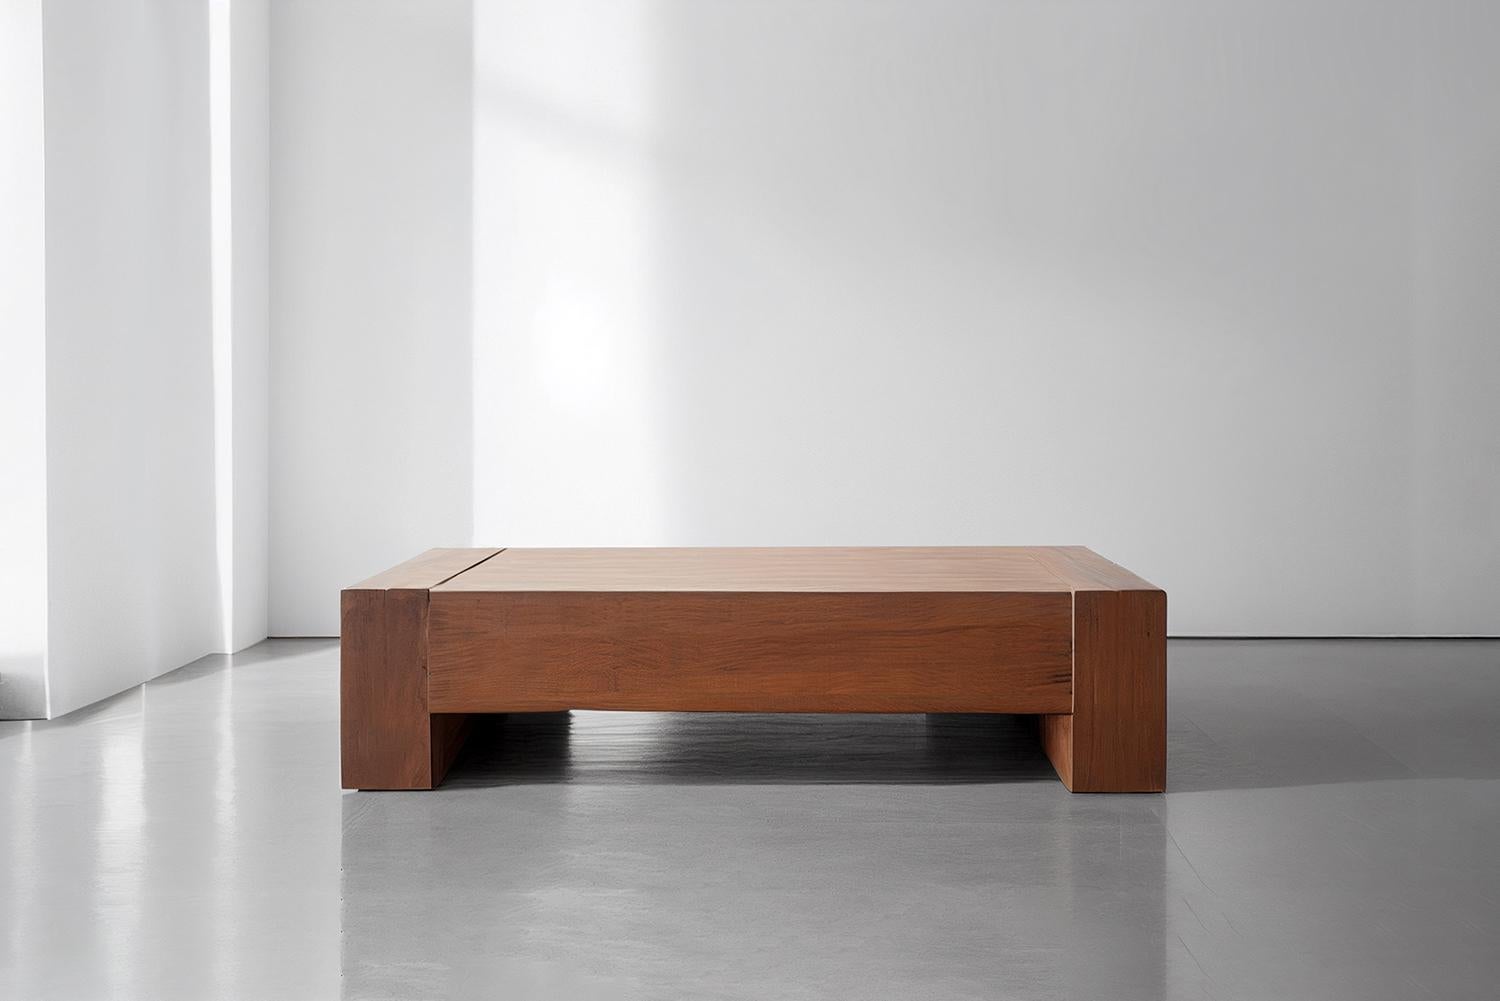 Mexican Brutalist Coffee Table, Minimal Old Wood Living Room Table, Elefante by NONO For Sale